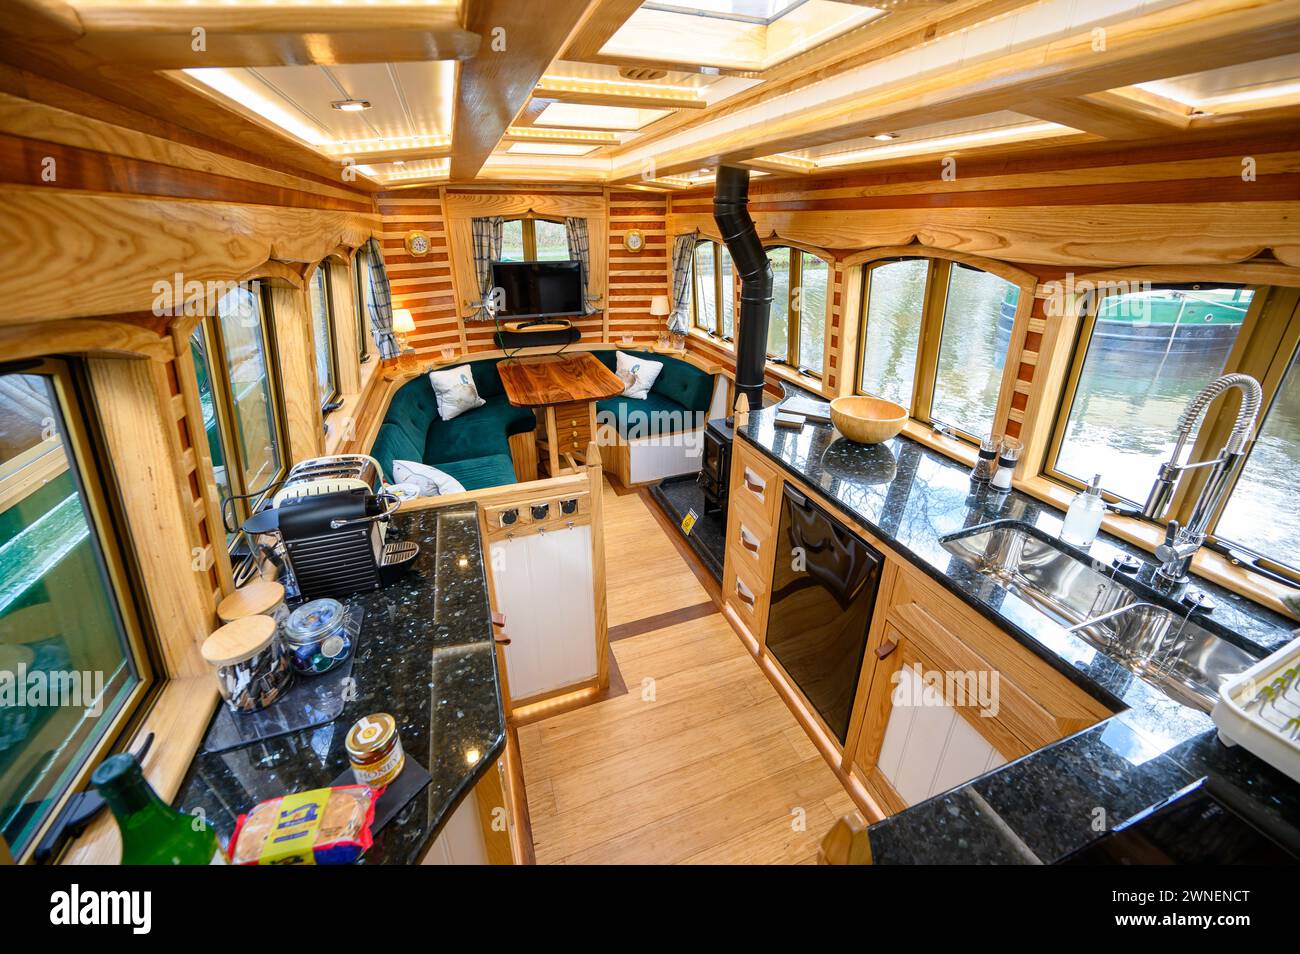 Eye catching interior of a holiday hire narrowboat with modern fixtures and fittings and distinictive wood patterns on the walls Stock Photo